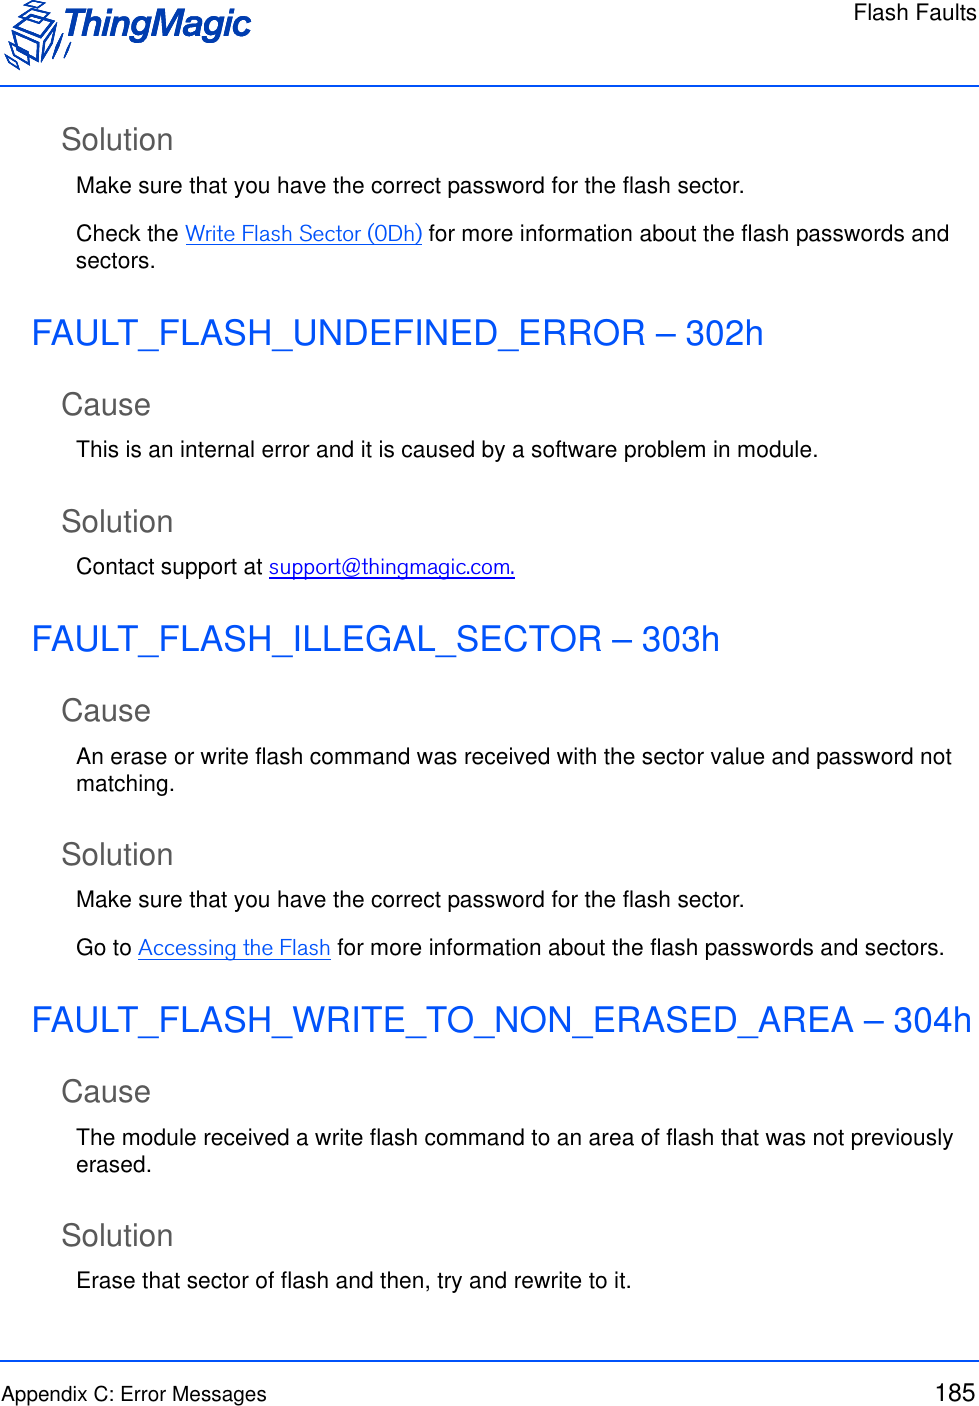 Flash FaultsAppendix C: Error Messages 185SolutionMake sure that you have the correct password for the flash sector. Check the Write Flash Sector (0Dh) for more information about the flash passwords and sectors.FAULT_FLASH_UNDEFINED_ERROR – 302hCauseThis is an internal error and it is caused by a software problem in module.SolutionContact support at support@thingmagic.com.FAULT_FLASH_ILLEGAL_SECTOR – 303hCauseAn erase or write flash command was received with the sector value and password not matching.SolutionMake sure that you have the correct password for the flash sector. Go to Accessing the Flash for more information about the flash passwords and sectors.FAULT_FLASH_WRITE_TO_NON_ERASED_AREA – 304hCauseThe module received a write flash command to an area of flash that was not previously erased.SolutionErase that sector of flash and then, try and rewrite to it.